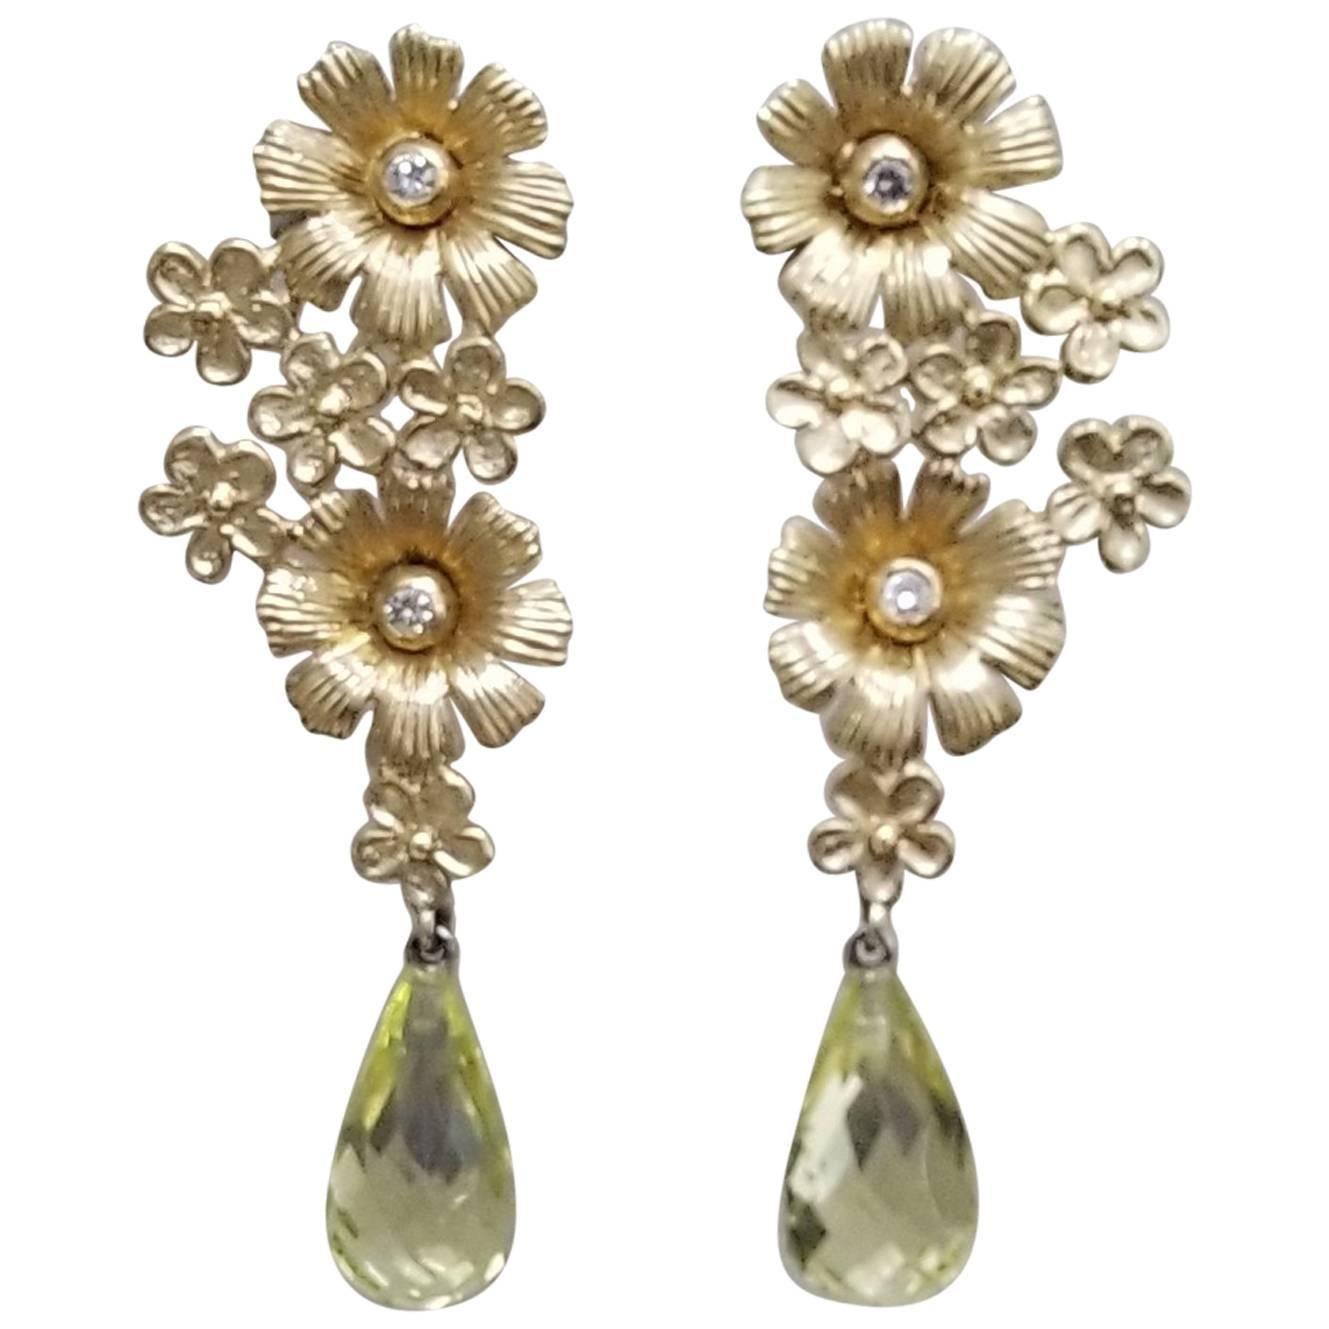 14k Yellow Gold Flower and Diamond Earrings with Citrine Briolette Cut Drops